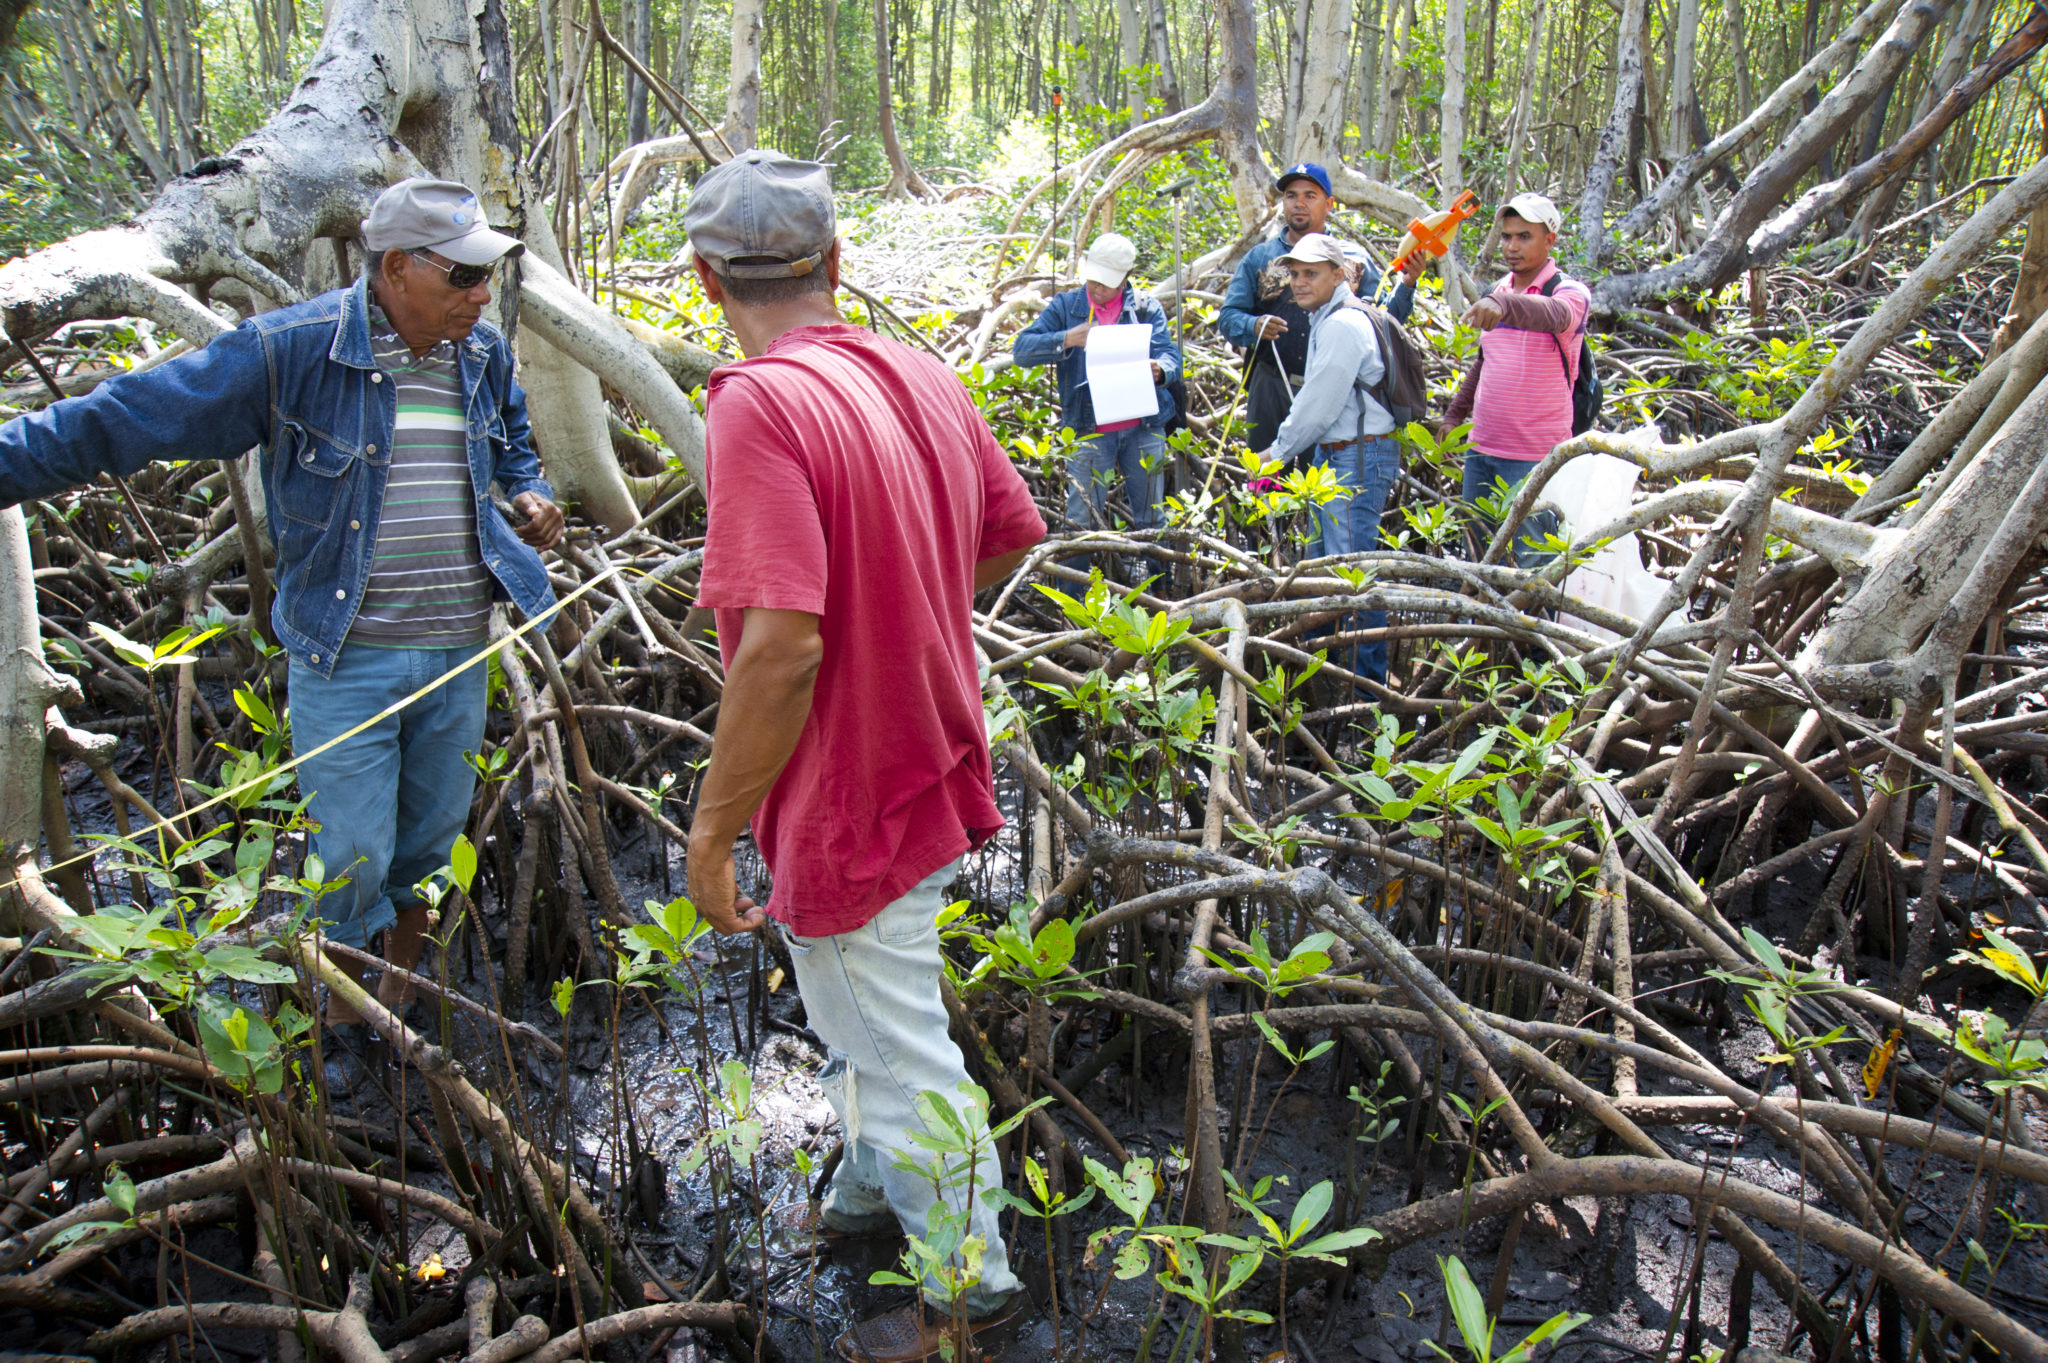 March 7, 2013, Manzanillo, Dominican Republic - Agrofrontera staff members carry out tests in the mangrove forests of the Mangroves of Estero Balsa Protected Area to analyze organic content. Counterpart supports Agrofrontera using a Frohring Foundation grant.